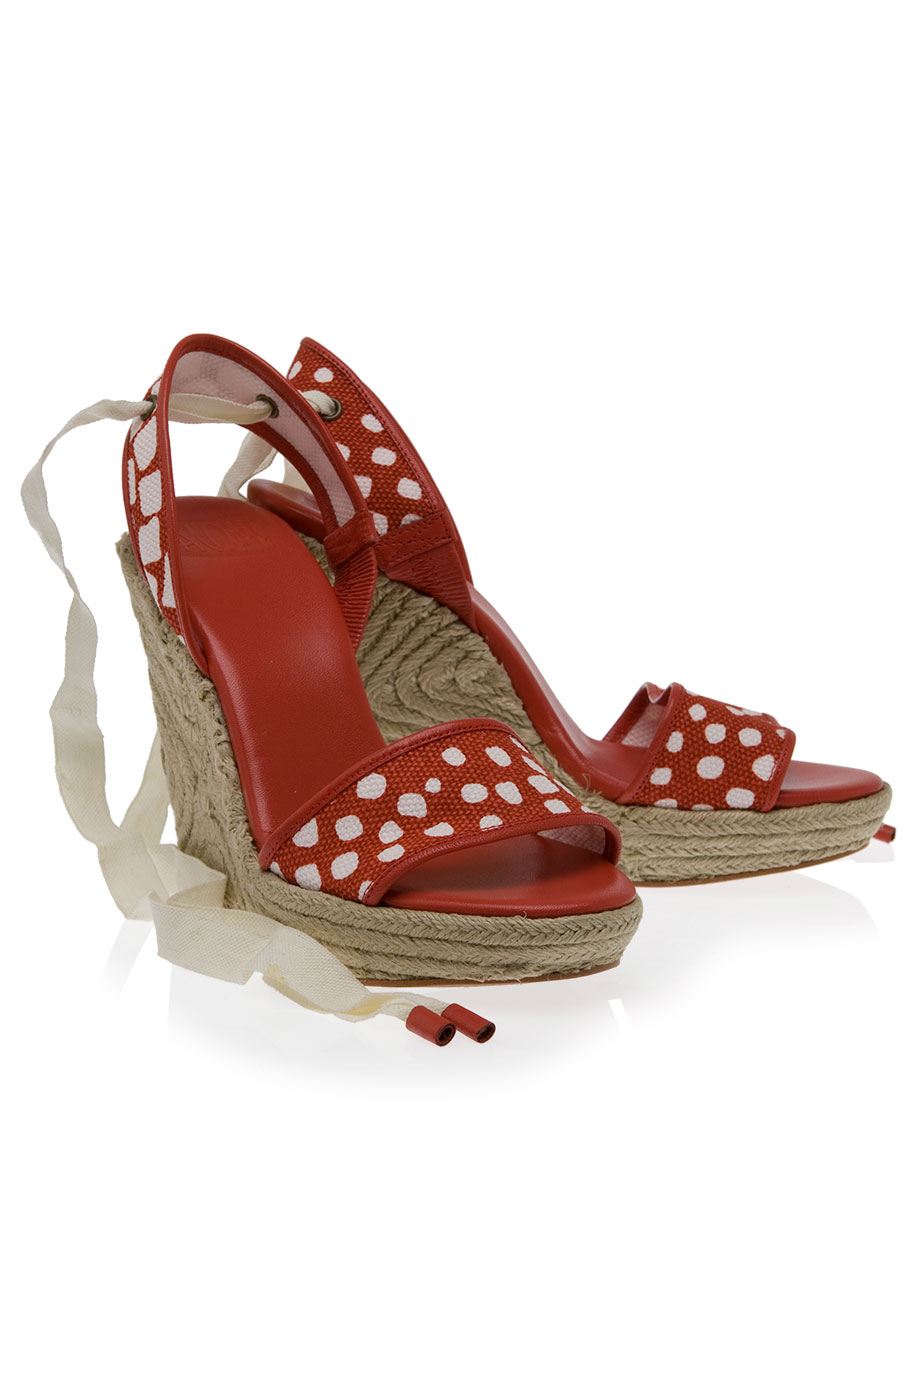 Shoeniverse: Big Sale Friday - DVF 1974 Red Persephone Rope Wedges